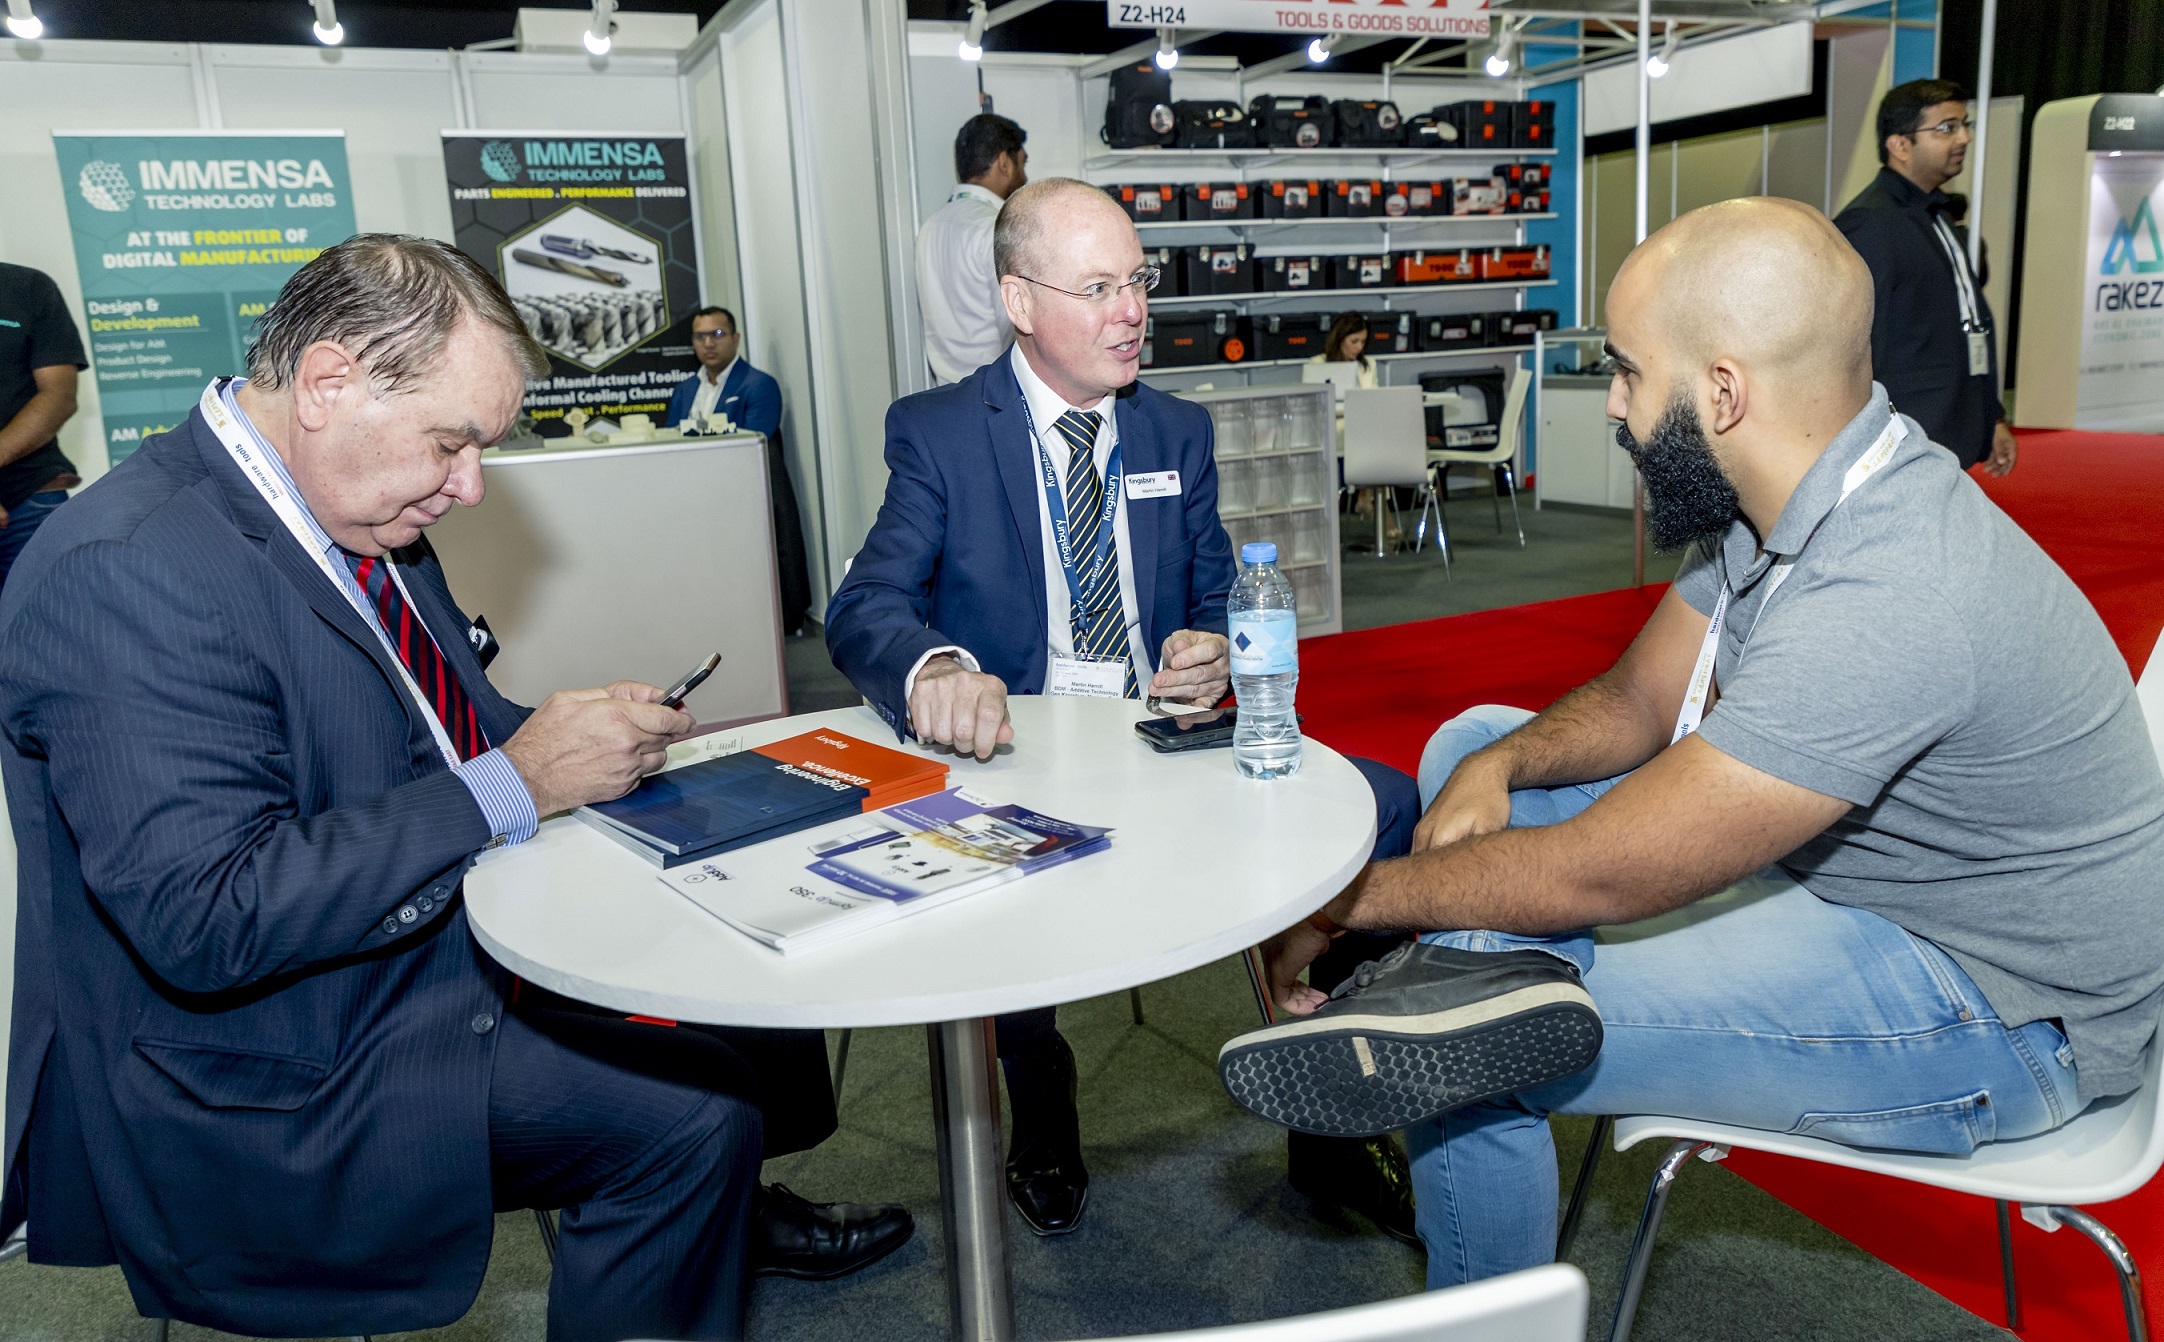 Business networking at Hardware + Tools Middle East